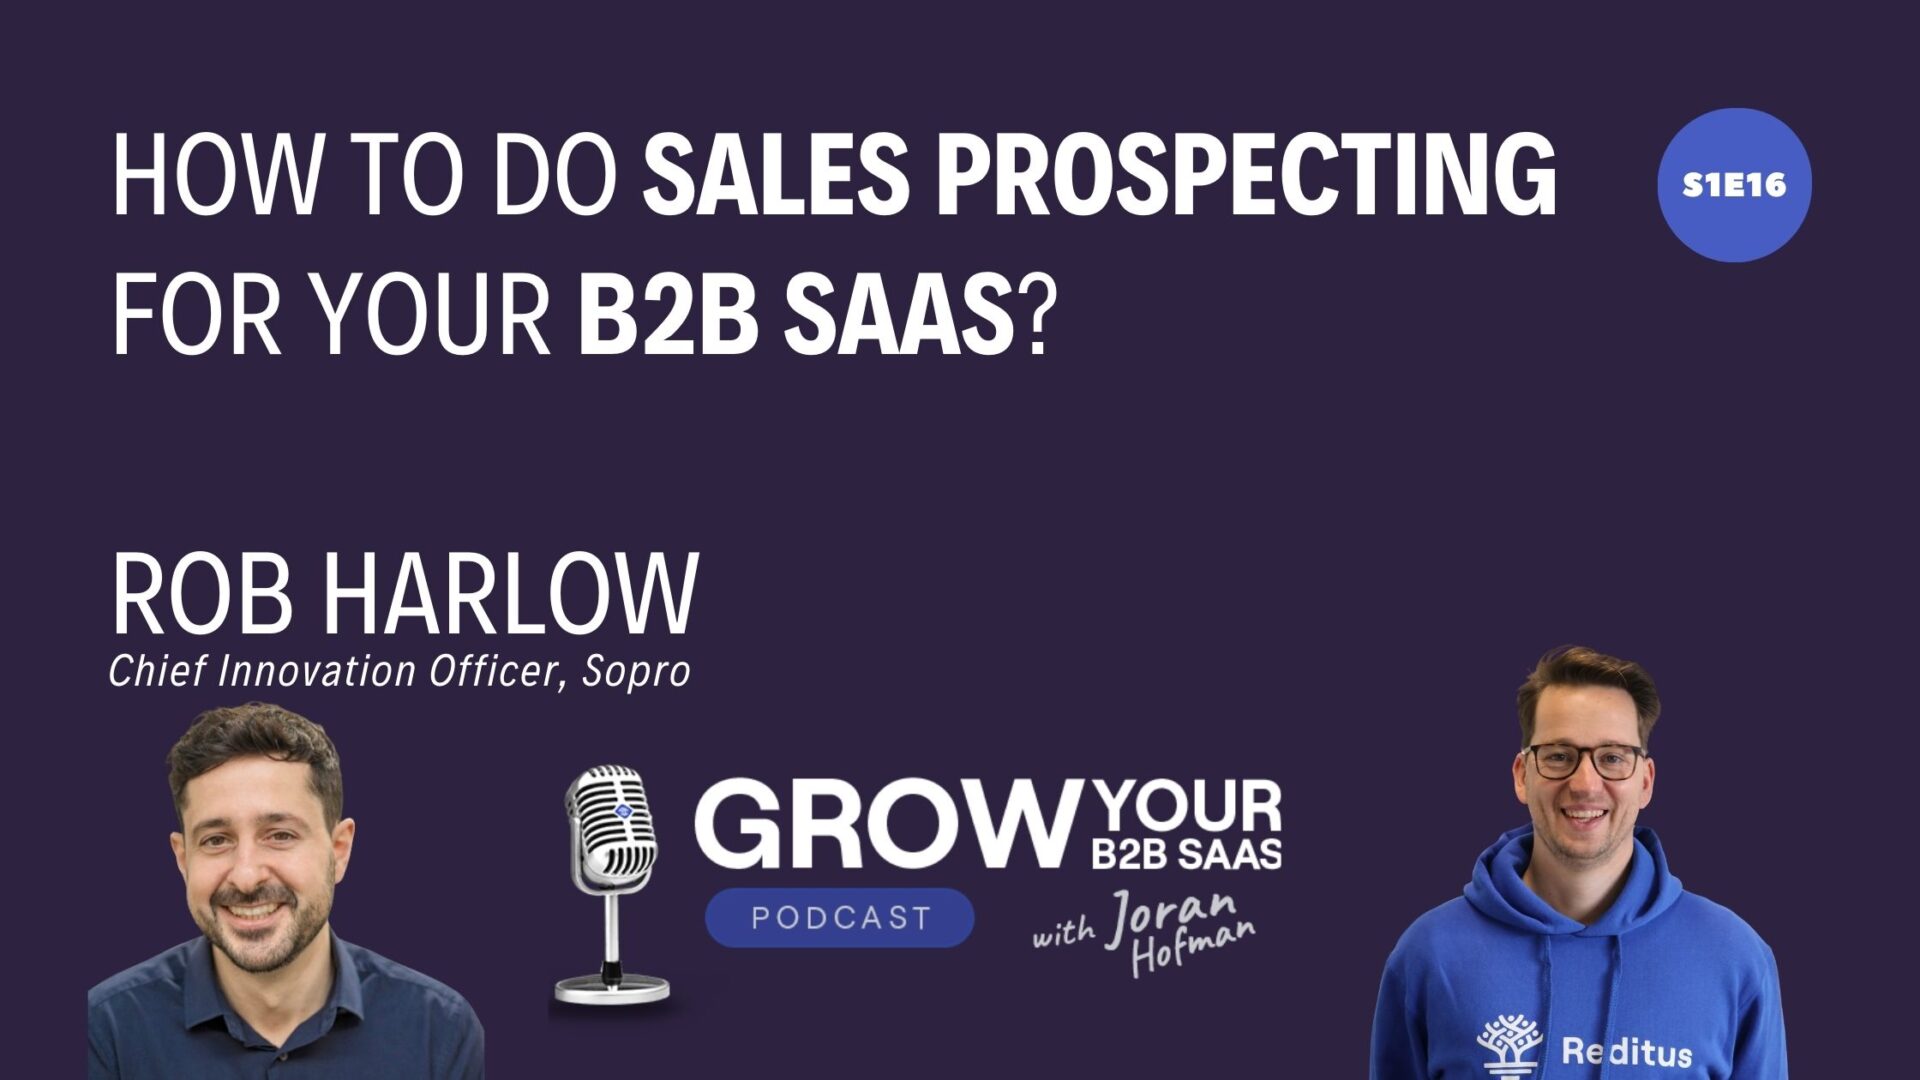 https://www.getreditus.com/podcast/s1e16-how-to-do-sales-prospecting-for-your-b2b-saas-with-rob-harlow/